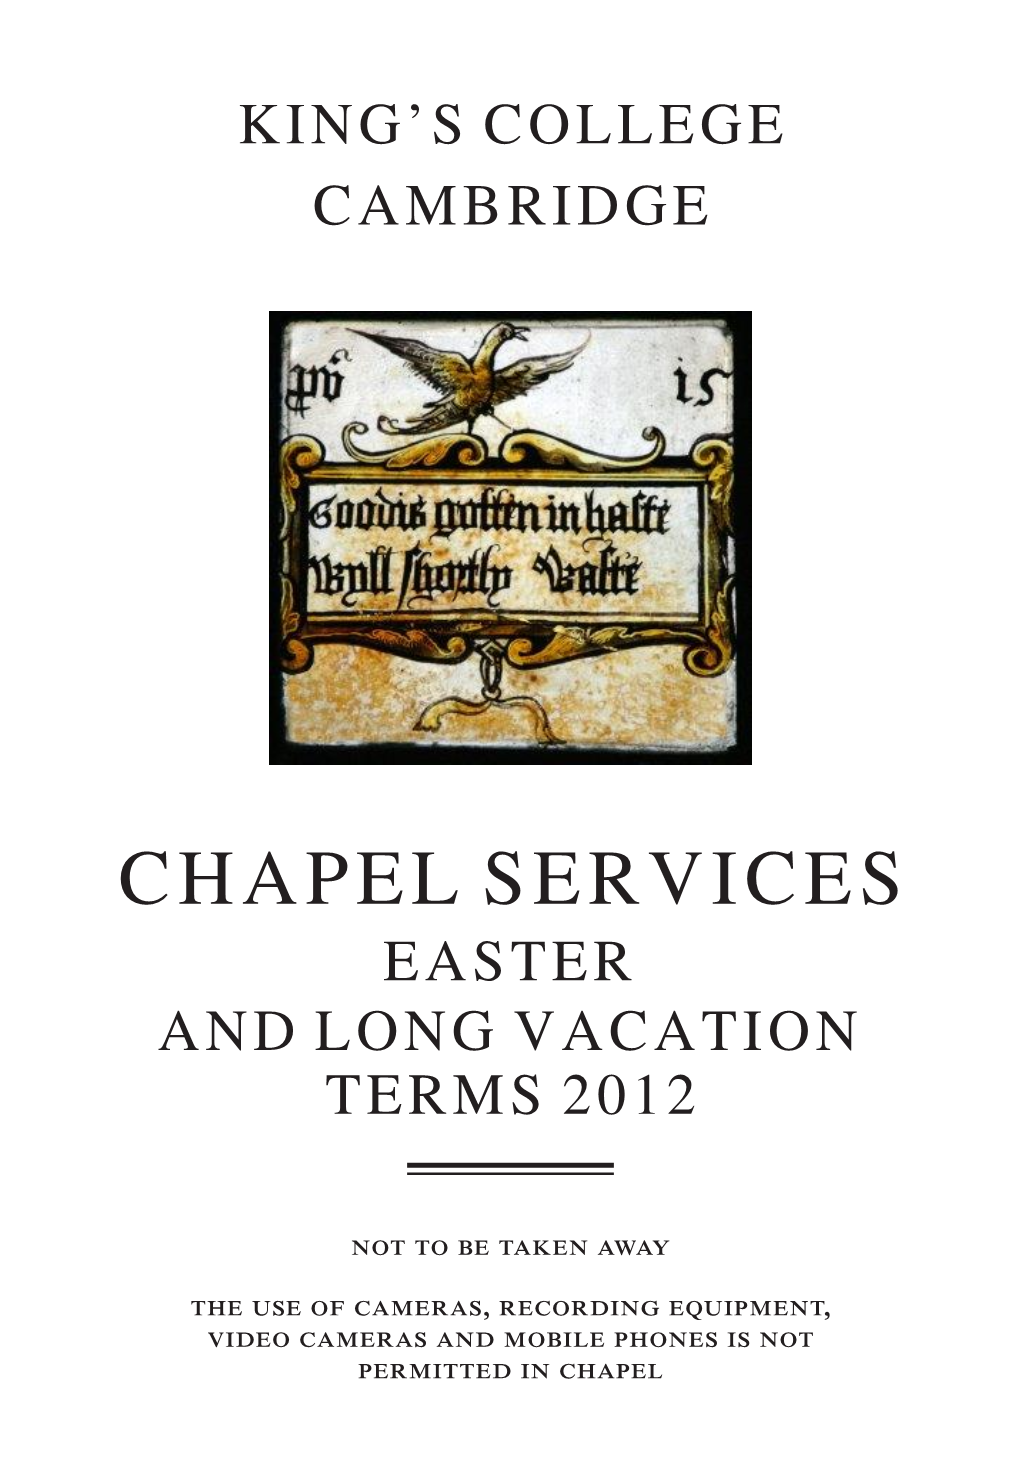 Easter and Long Vacation Terms 2012 Service List